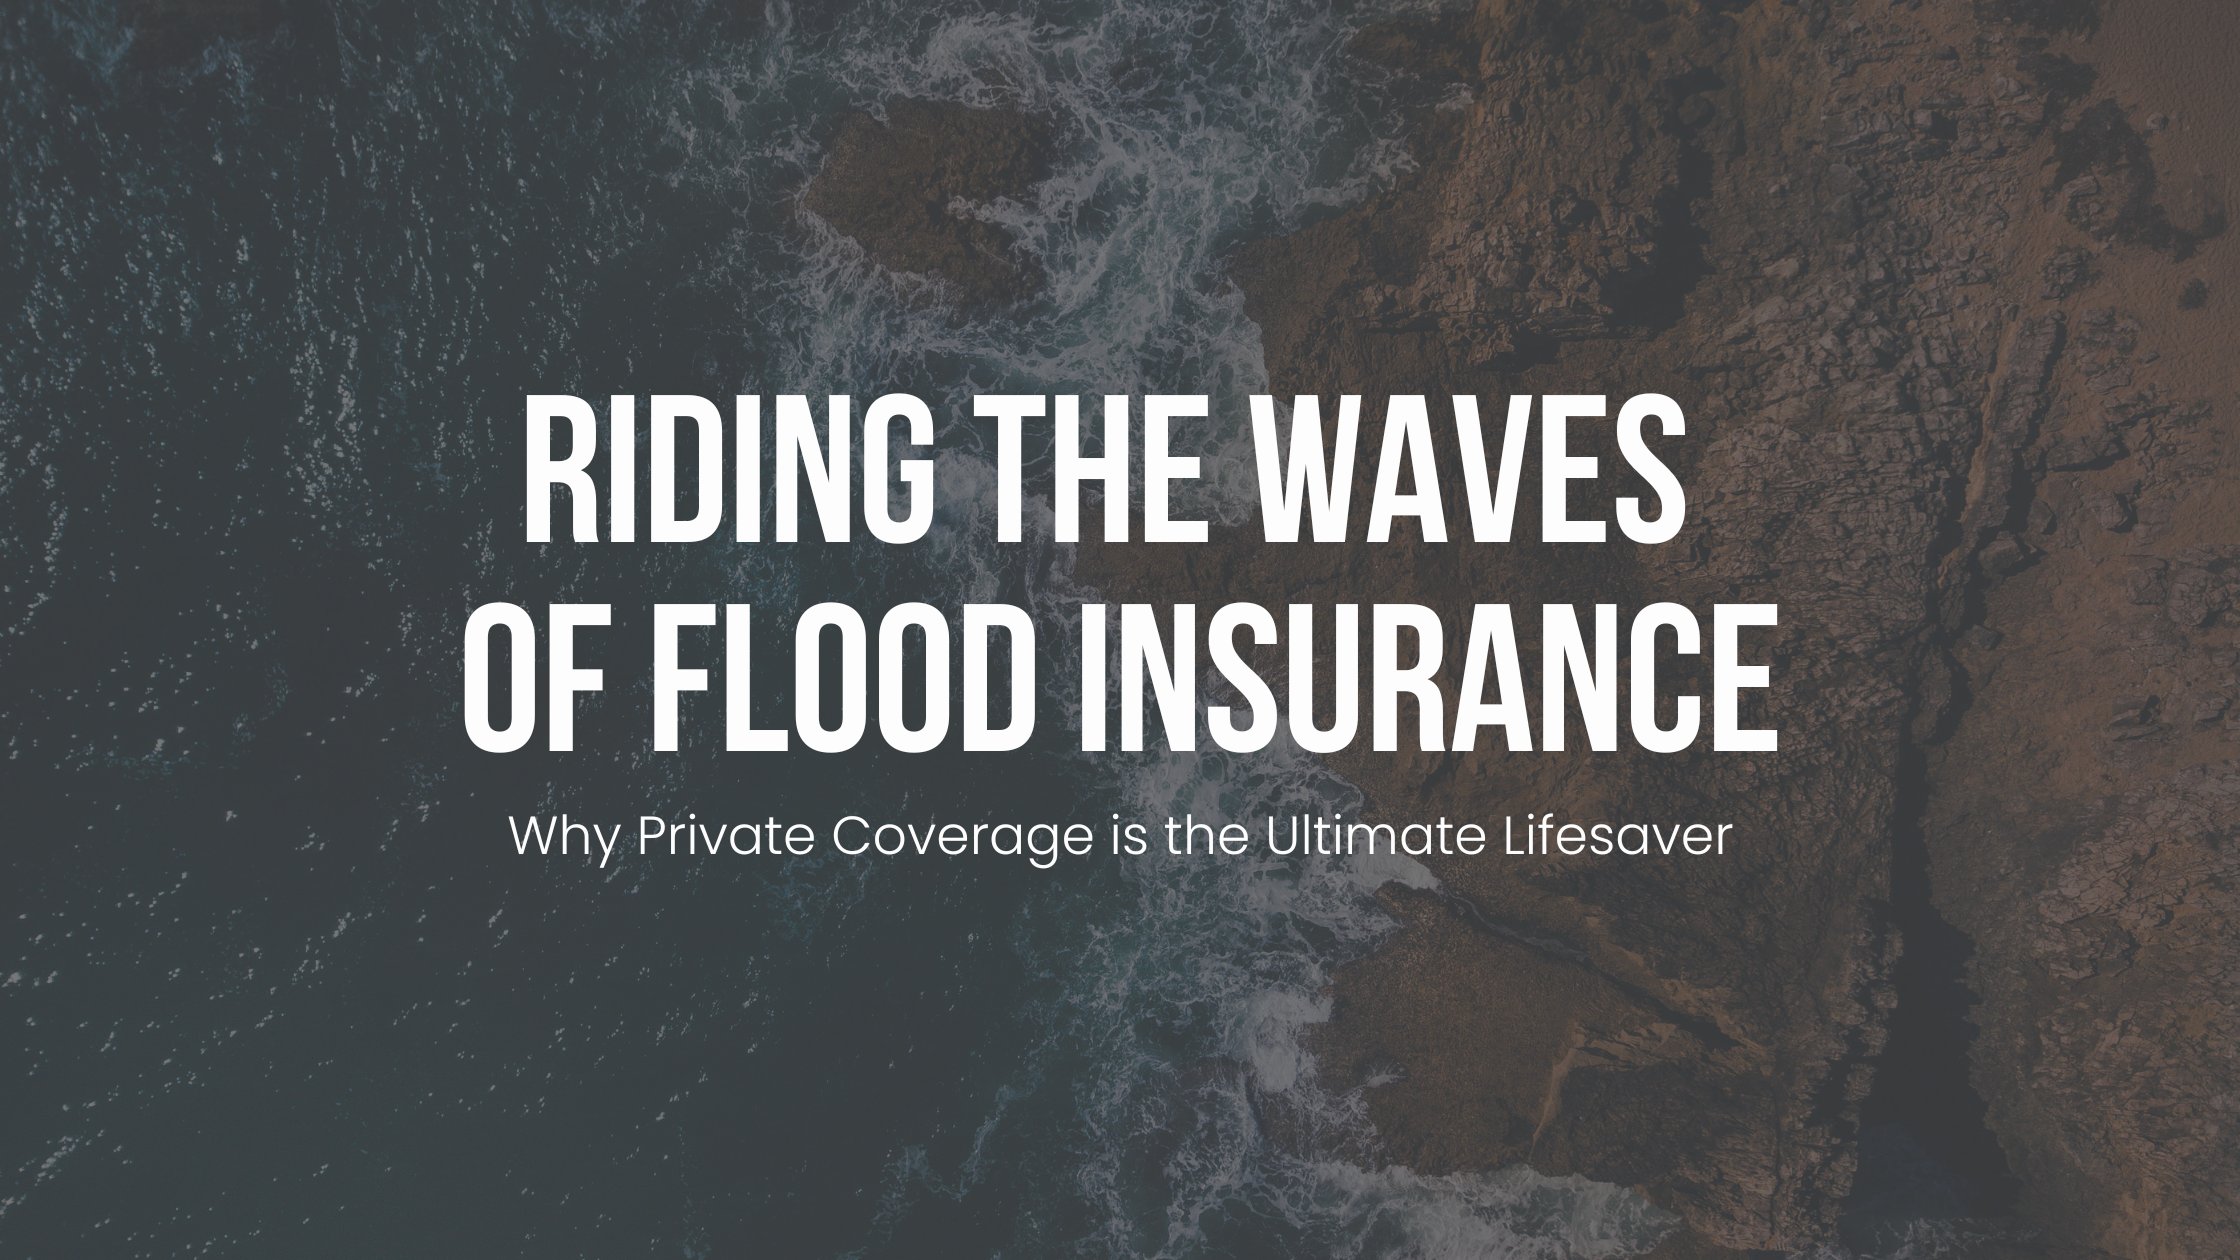 Riding the Waves of Flood Insurance: Why Private Coverage is the Ultimate Lifesaver